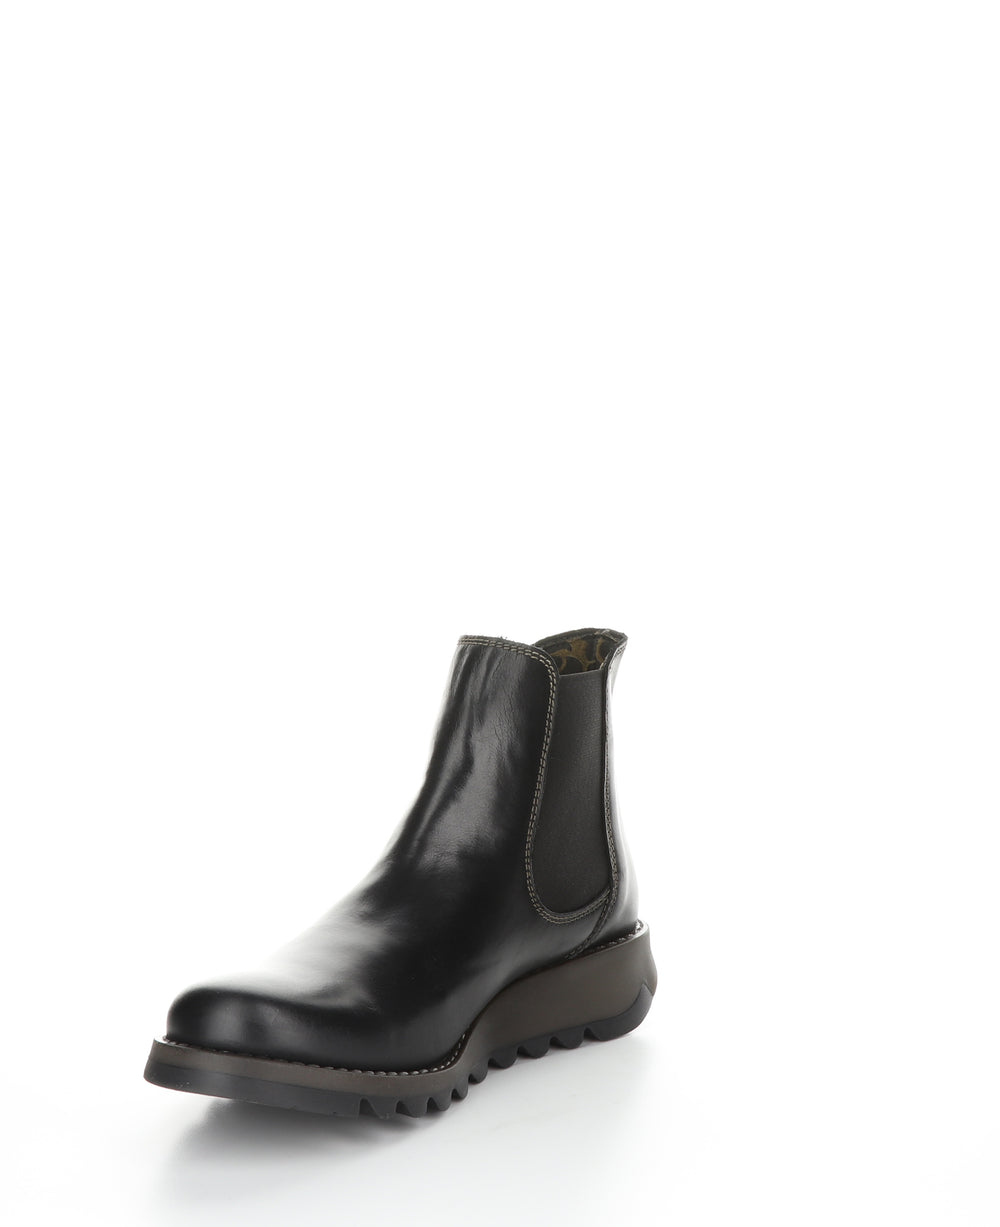 SALV Black Round Toe Ankle Boots